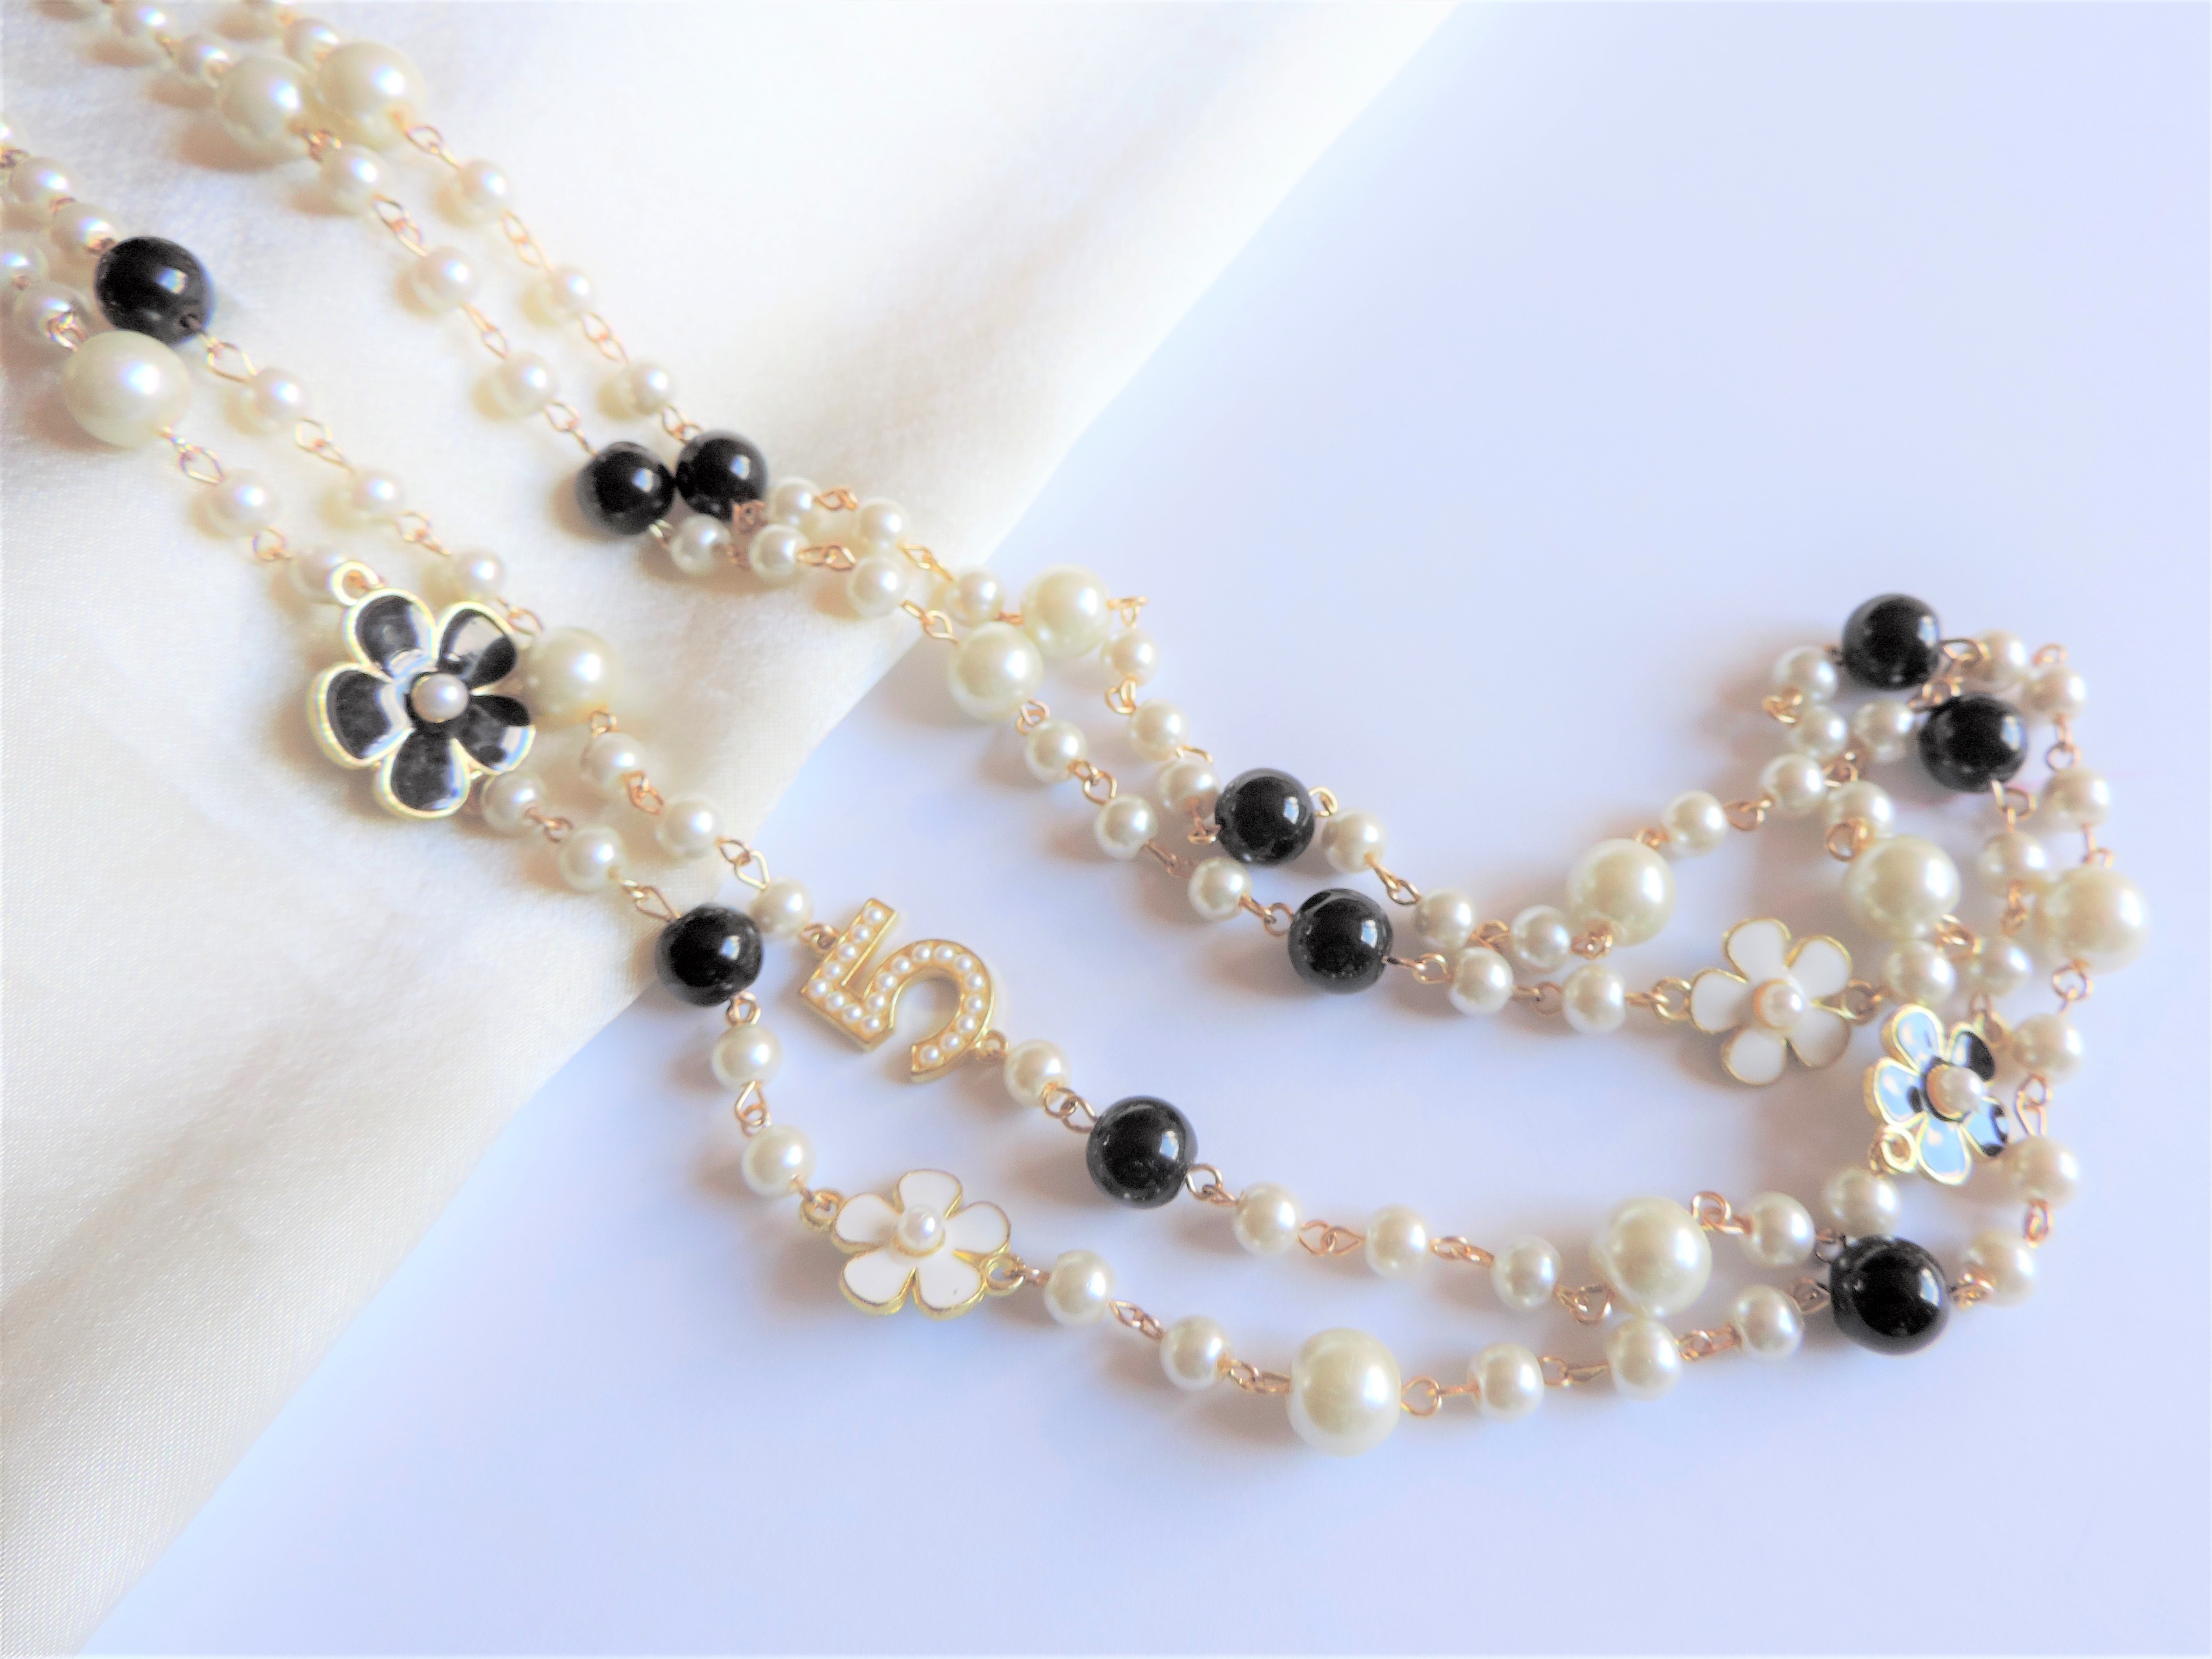 Black and White Number 5 Pearl Necklace 28 inches Long - Image 3 of 4